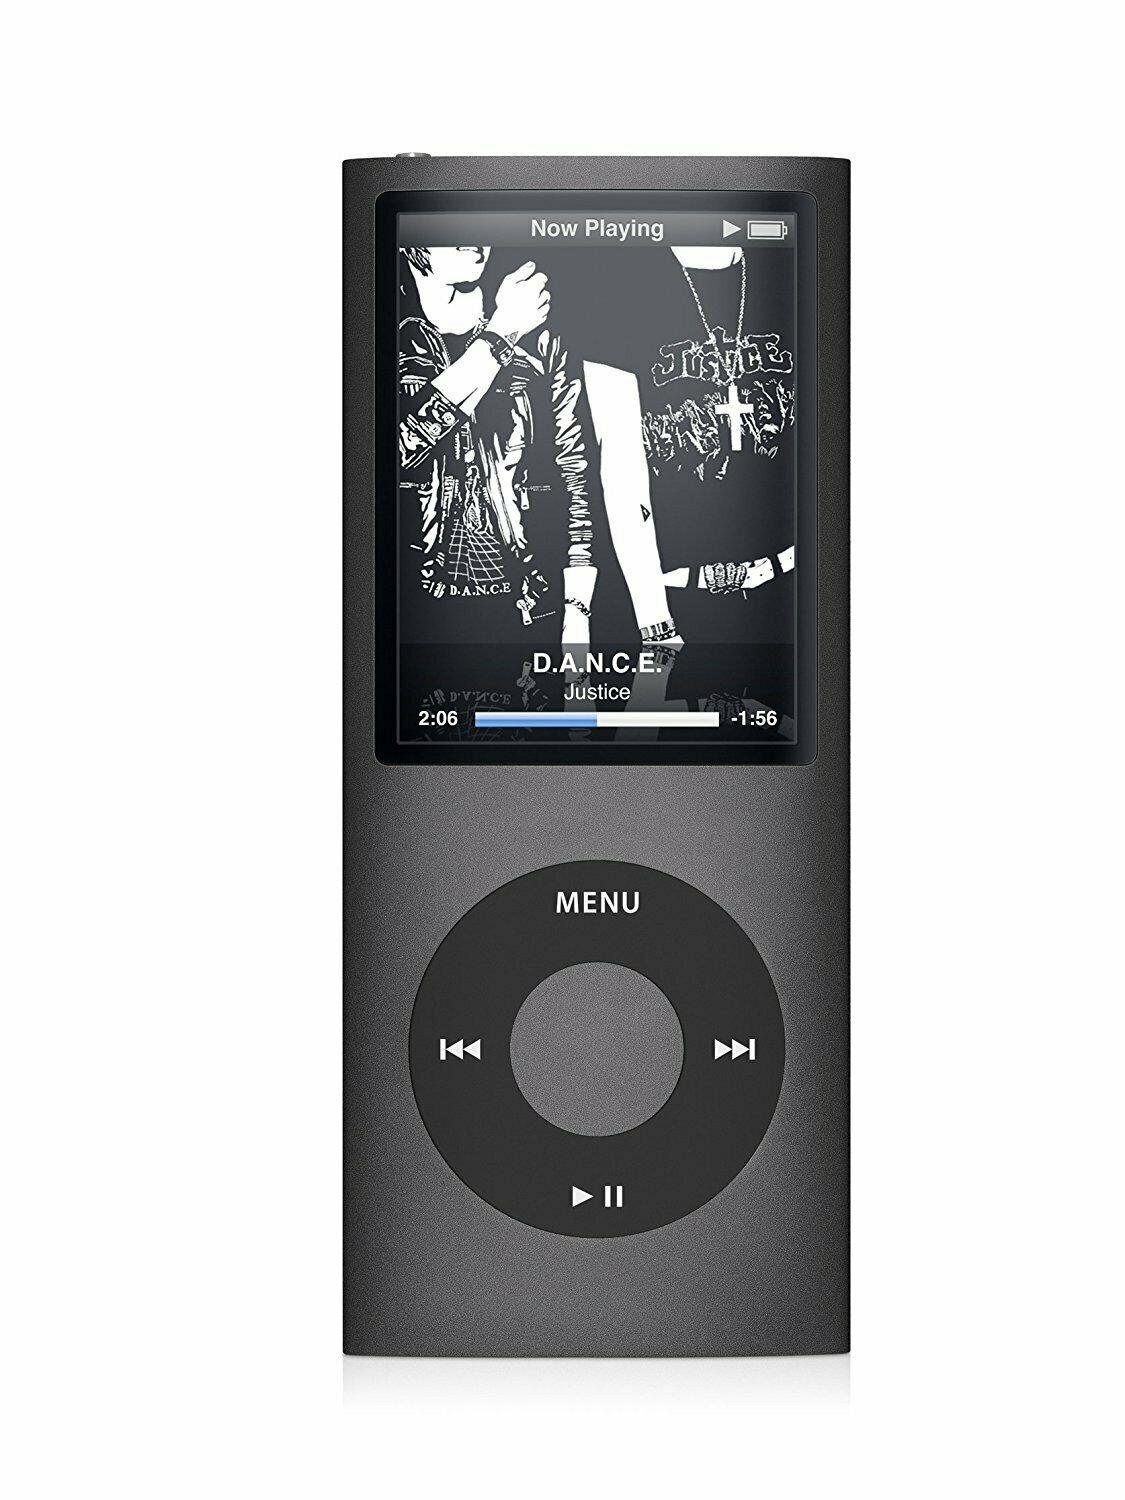 download the new version for ipod Rhino 8